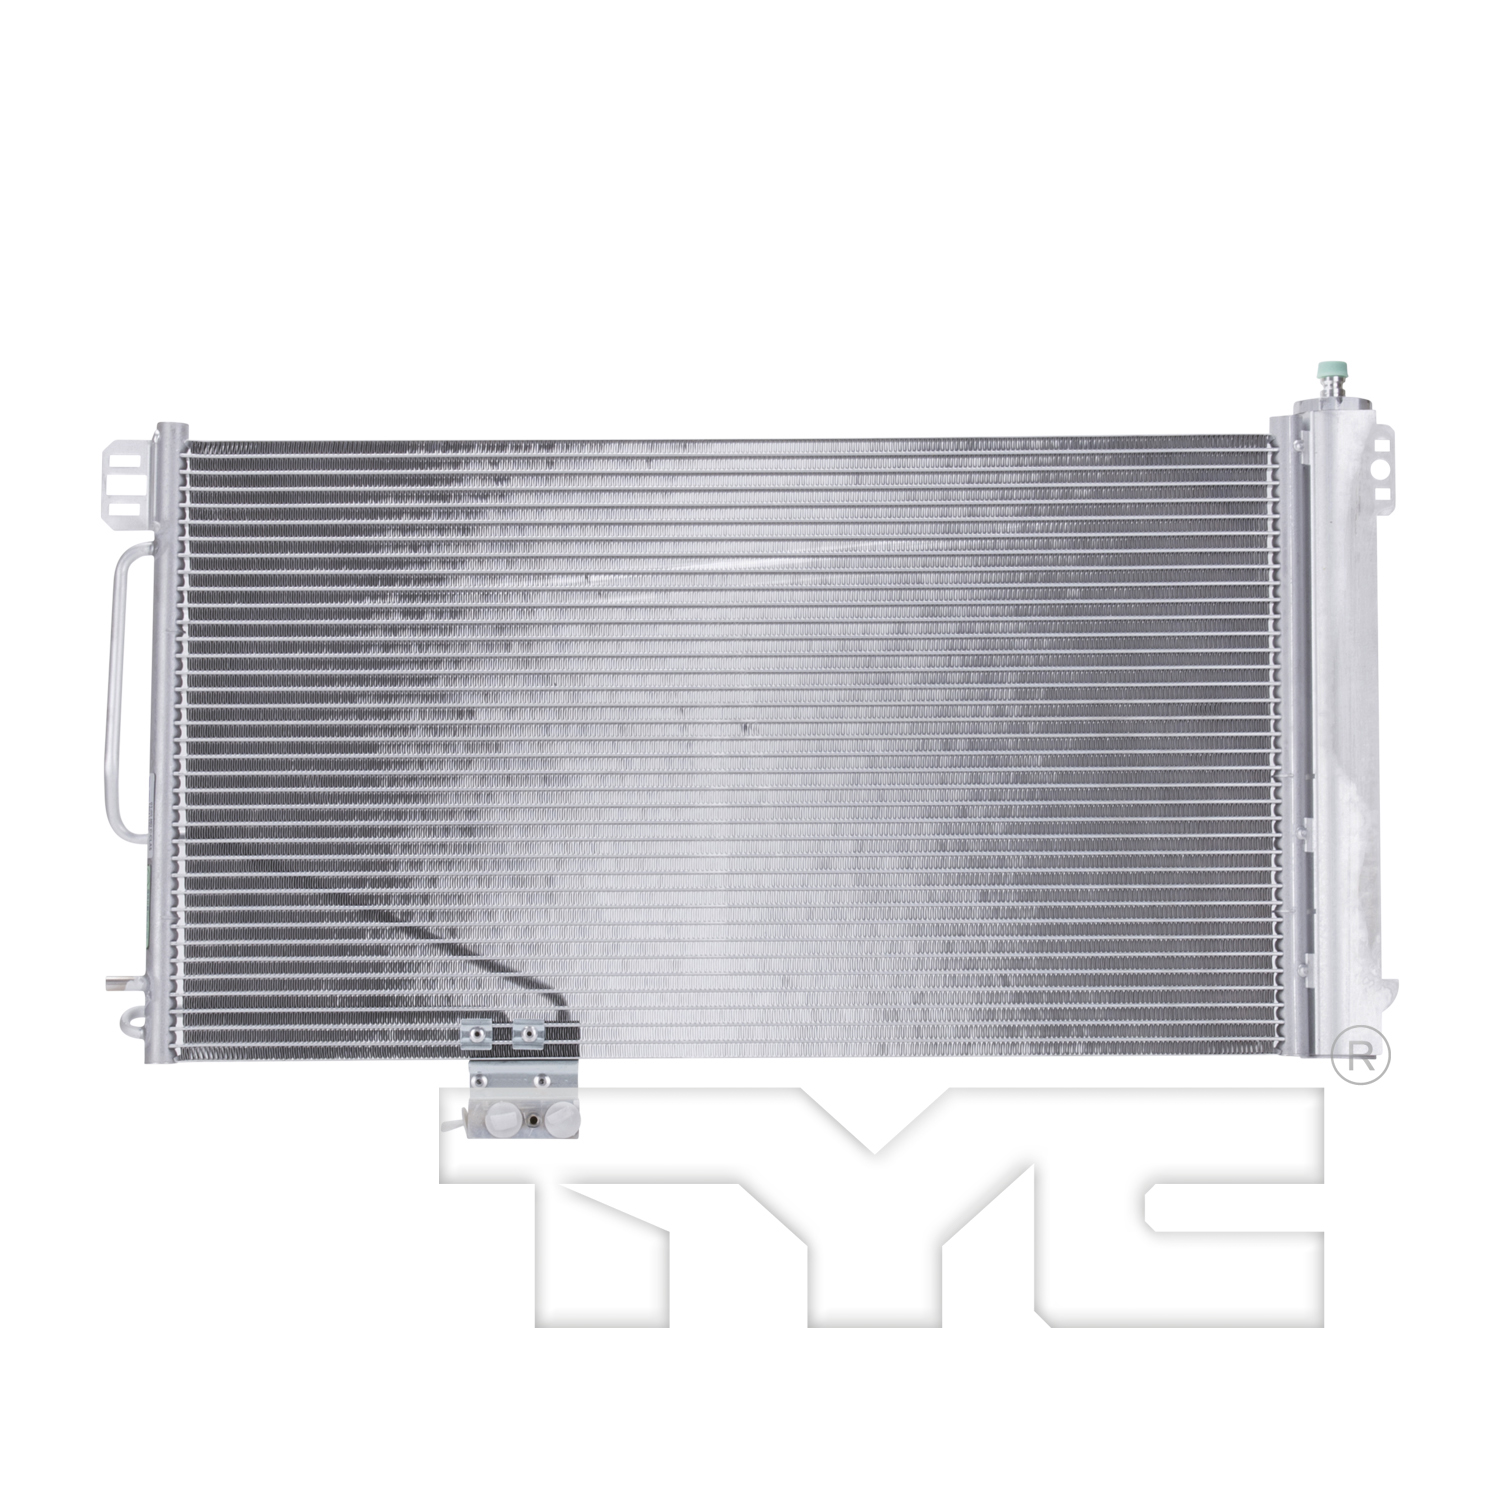 Aftermarket AC CONDENSERS for MERCEDES-BENZ - C32 AMG, C32 AMG,03-04,Air conditioning condenser